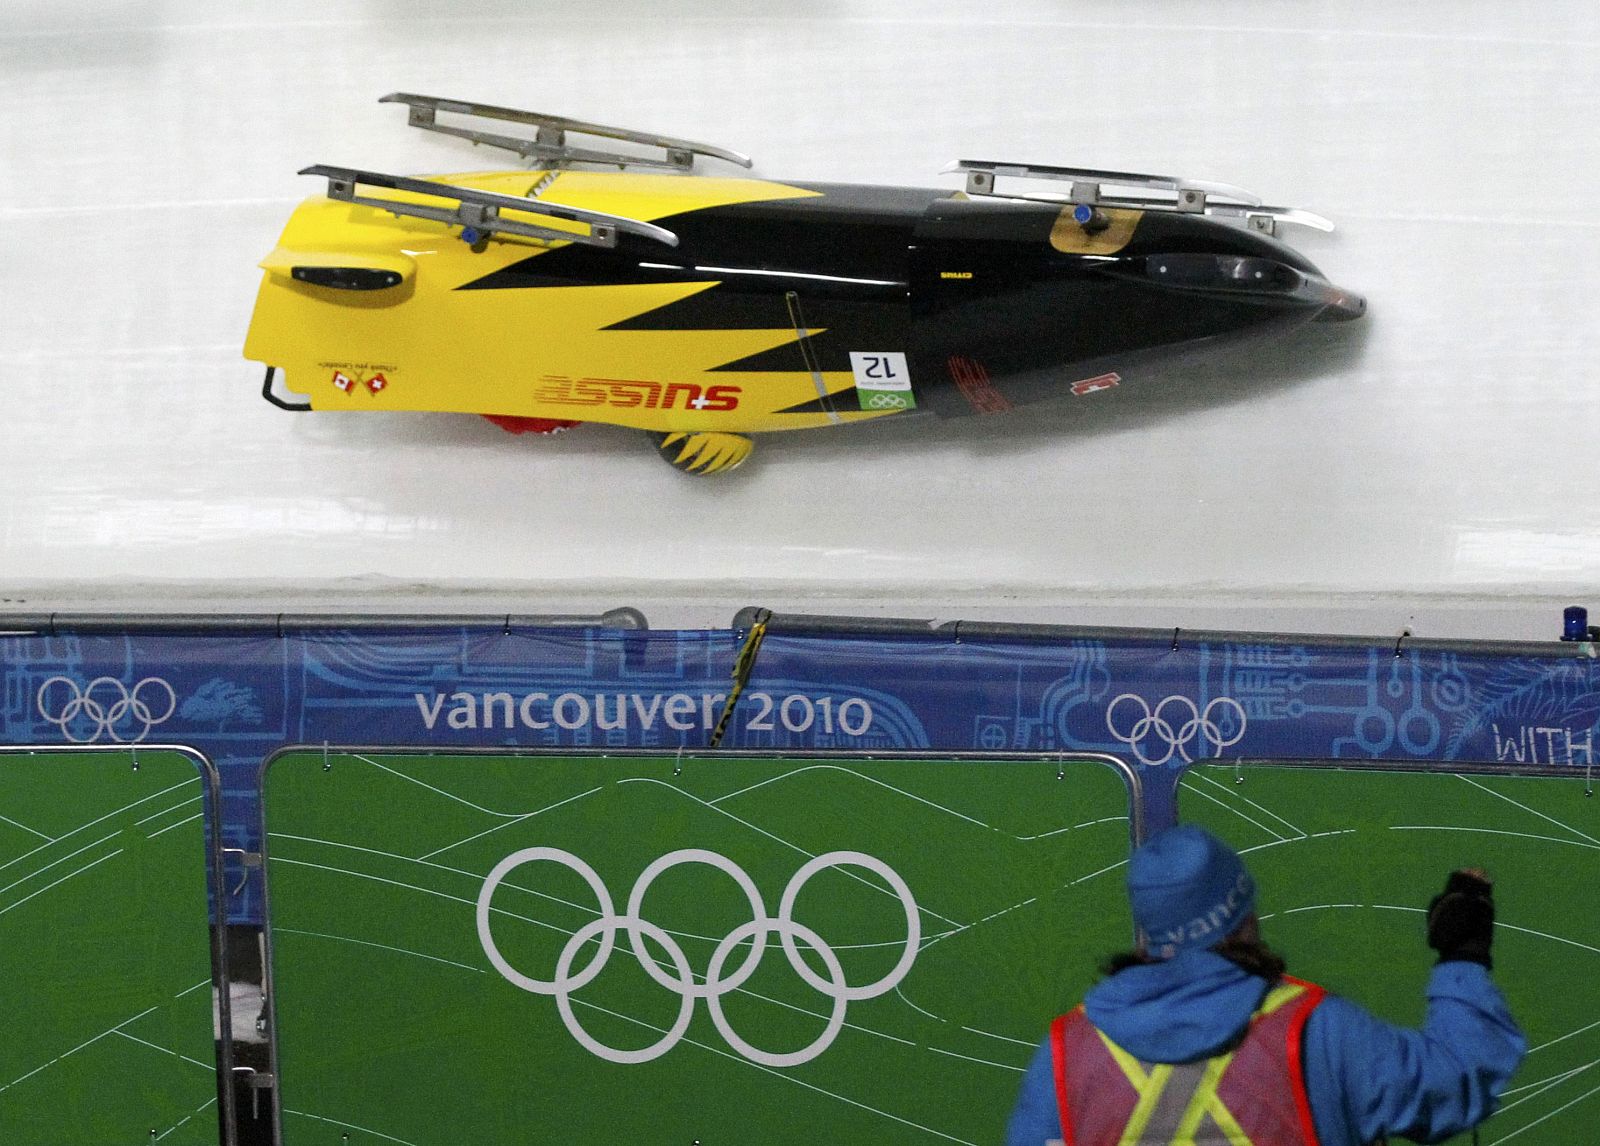 Pilot Schmid and team mate Egger of Switzerland crash during the two-man bobsleigh training heats at the Vancouver 2010 Winter Olympics in Whistler